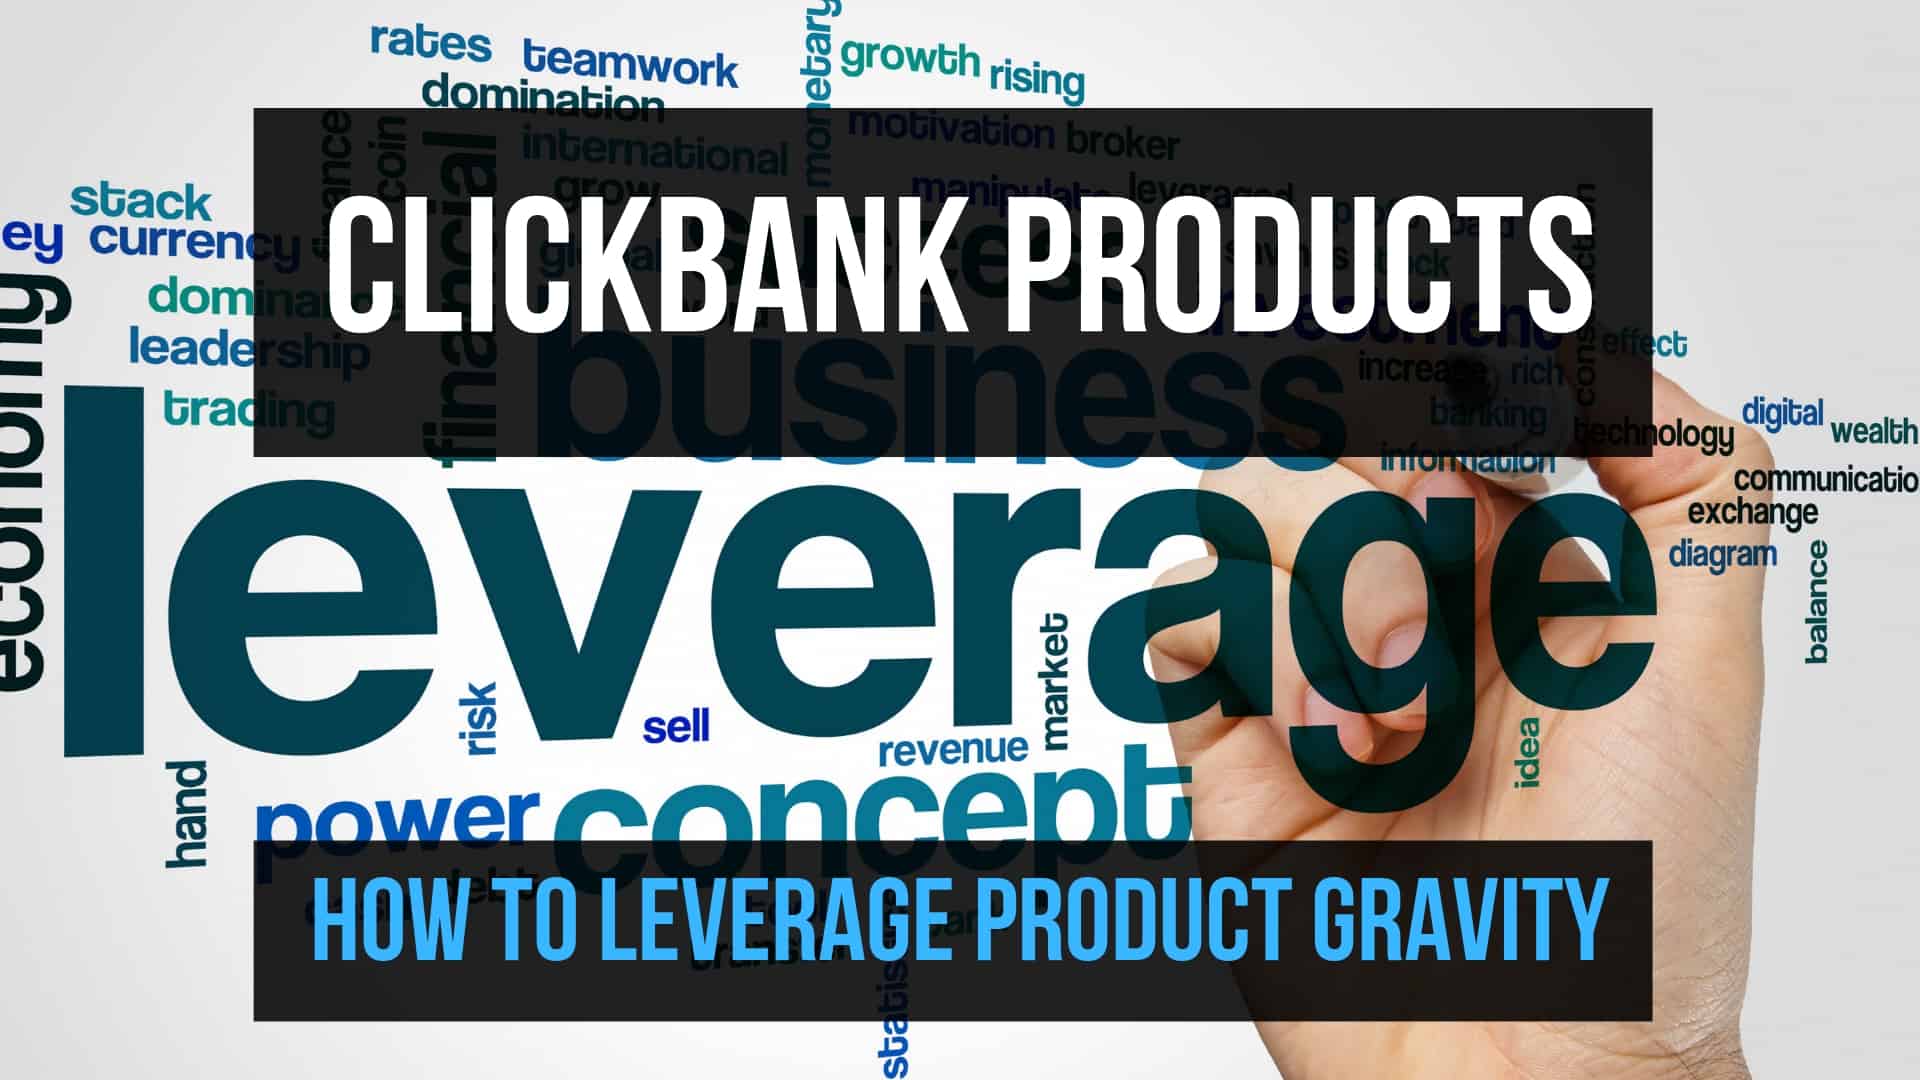 Clickbank Products how to leverage gravity